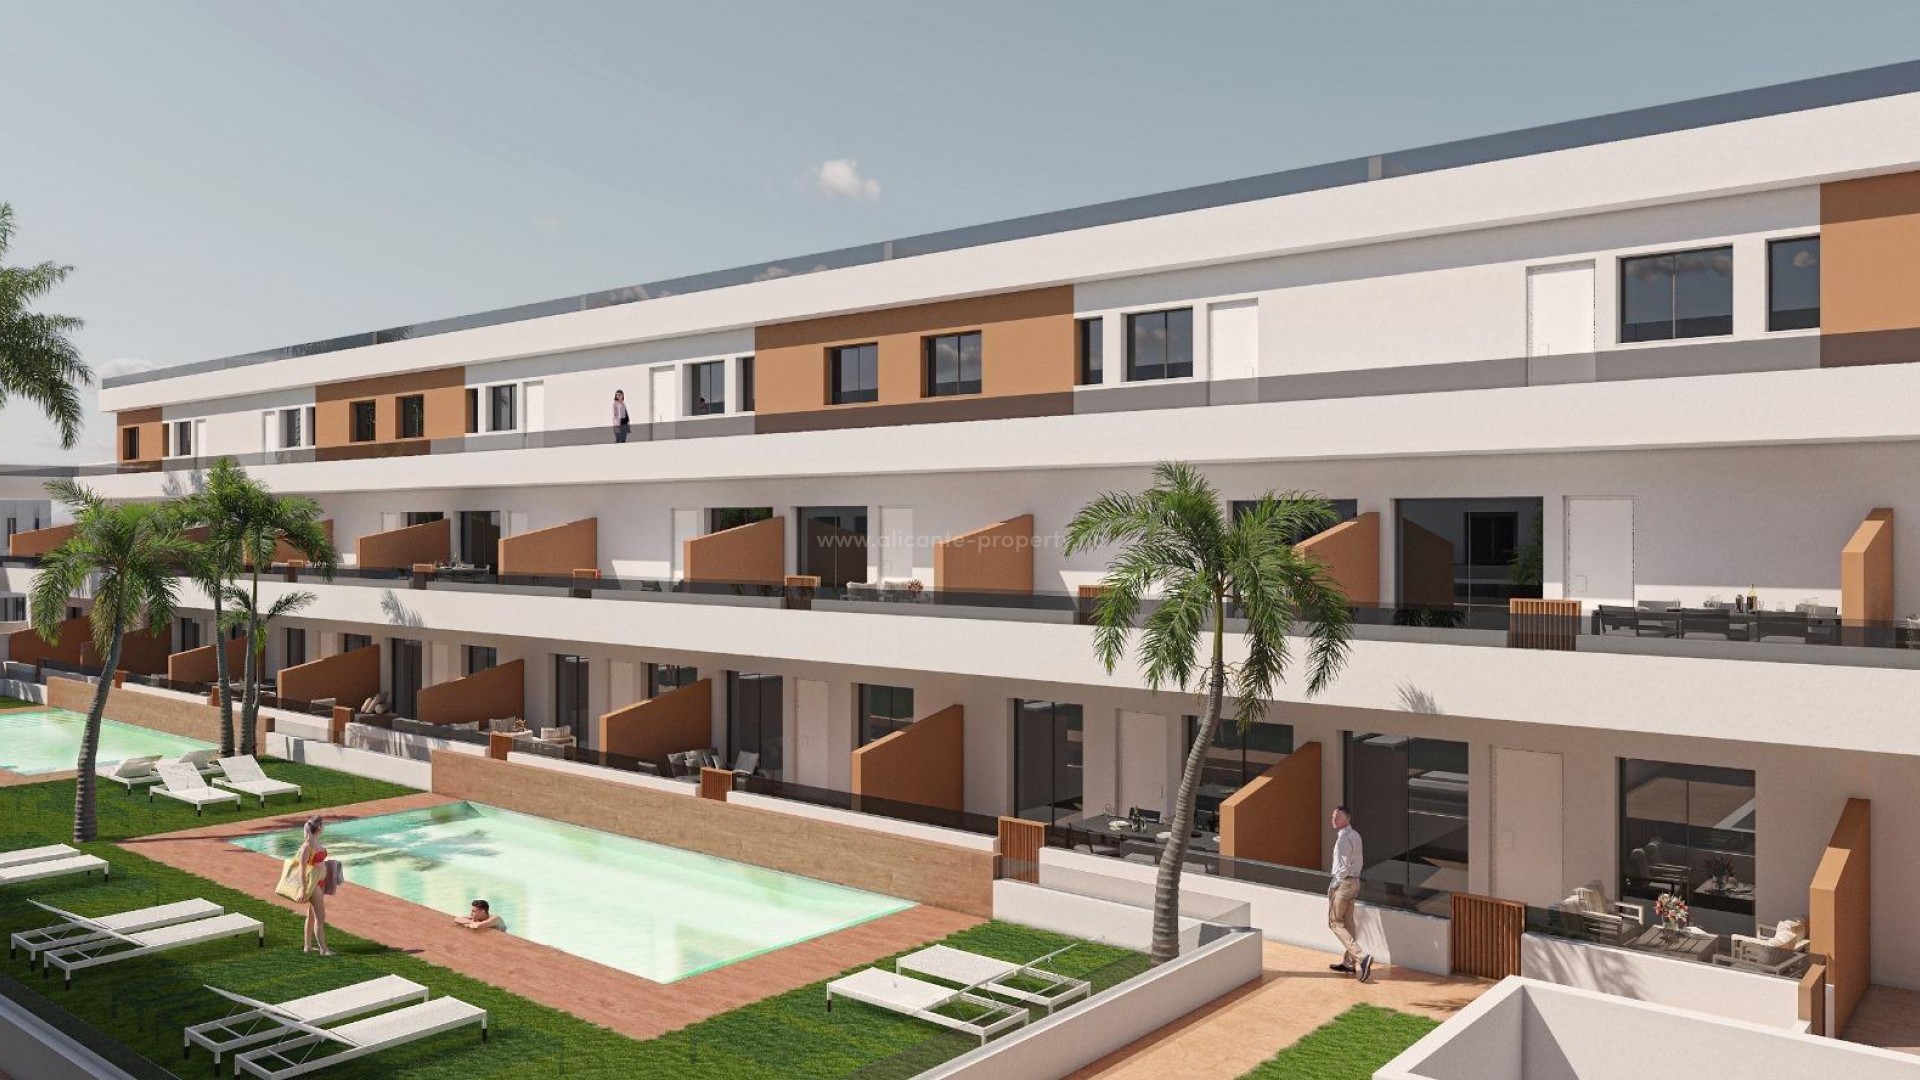 Residential complex with apartments in Pilar de La Horadada, 2/3 bedrooms, 2 bathrooms, common areas with pool, all apartments with parking and storage.